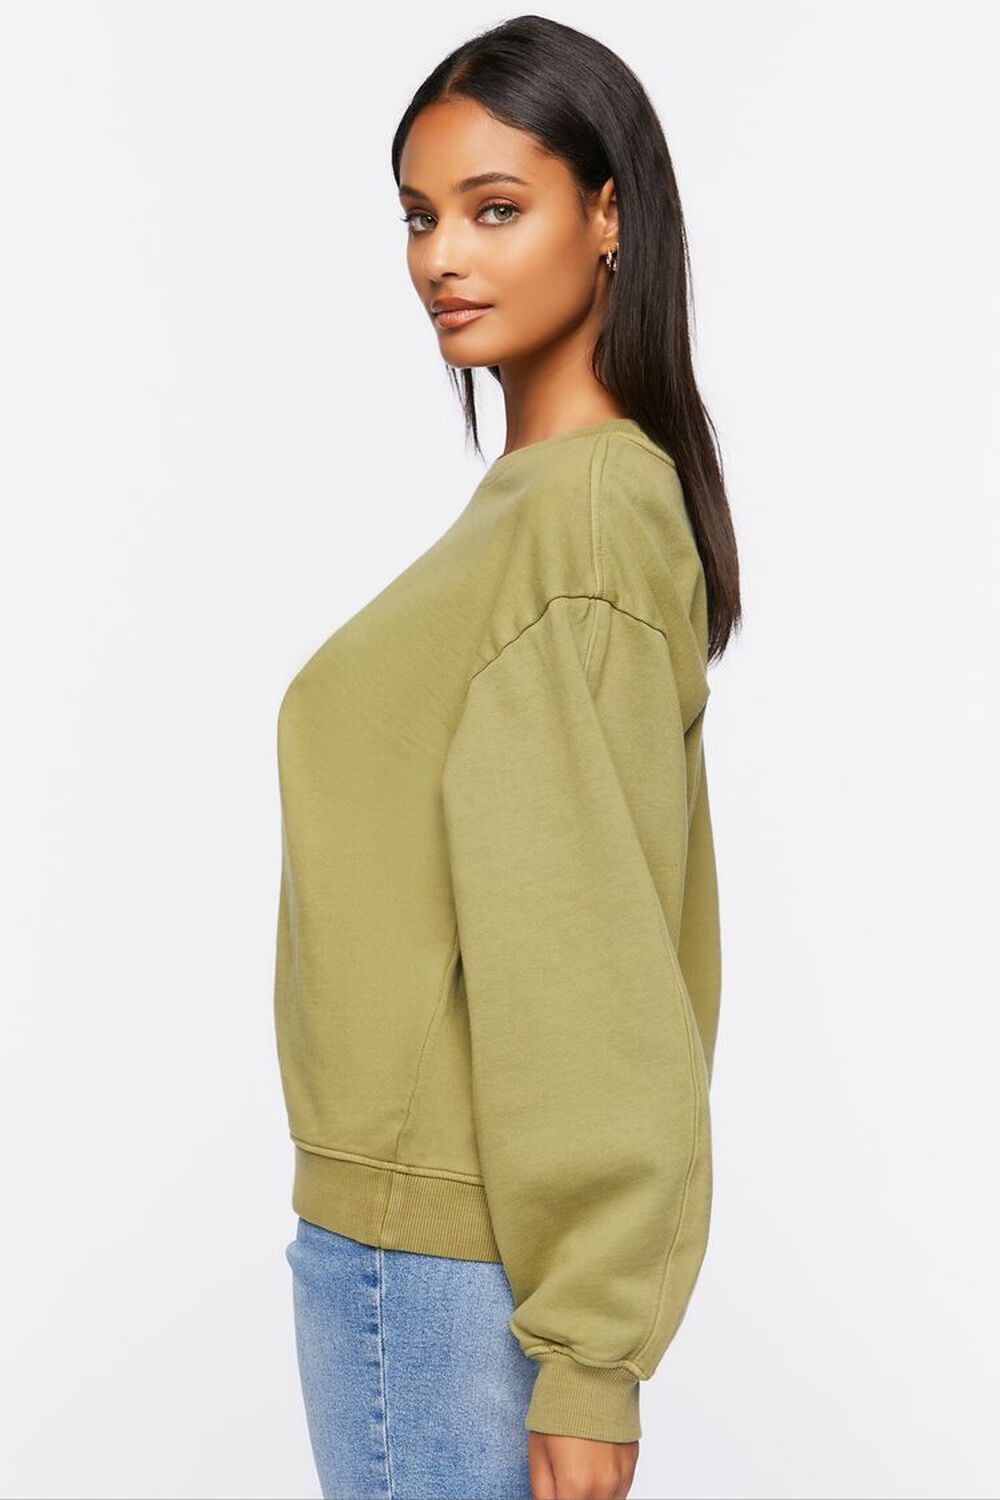 OLIVE Ribbed-Trim Crew Neck Pullover, image 2